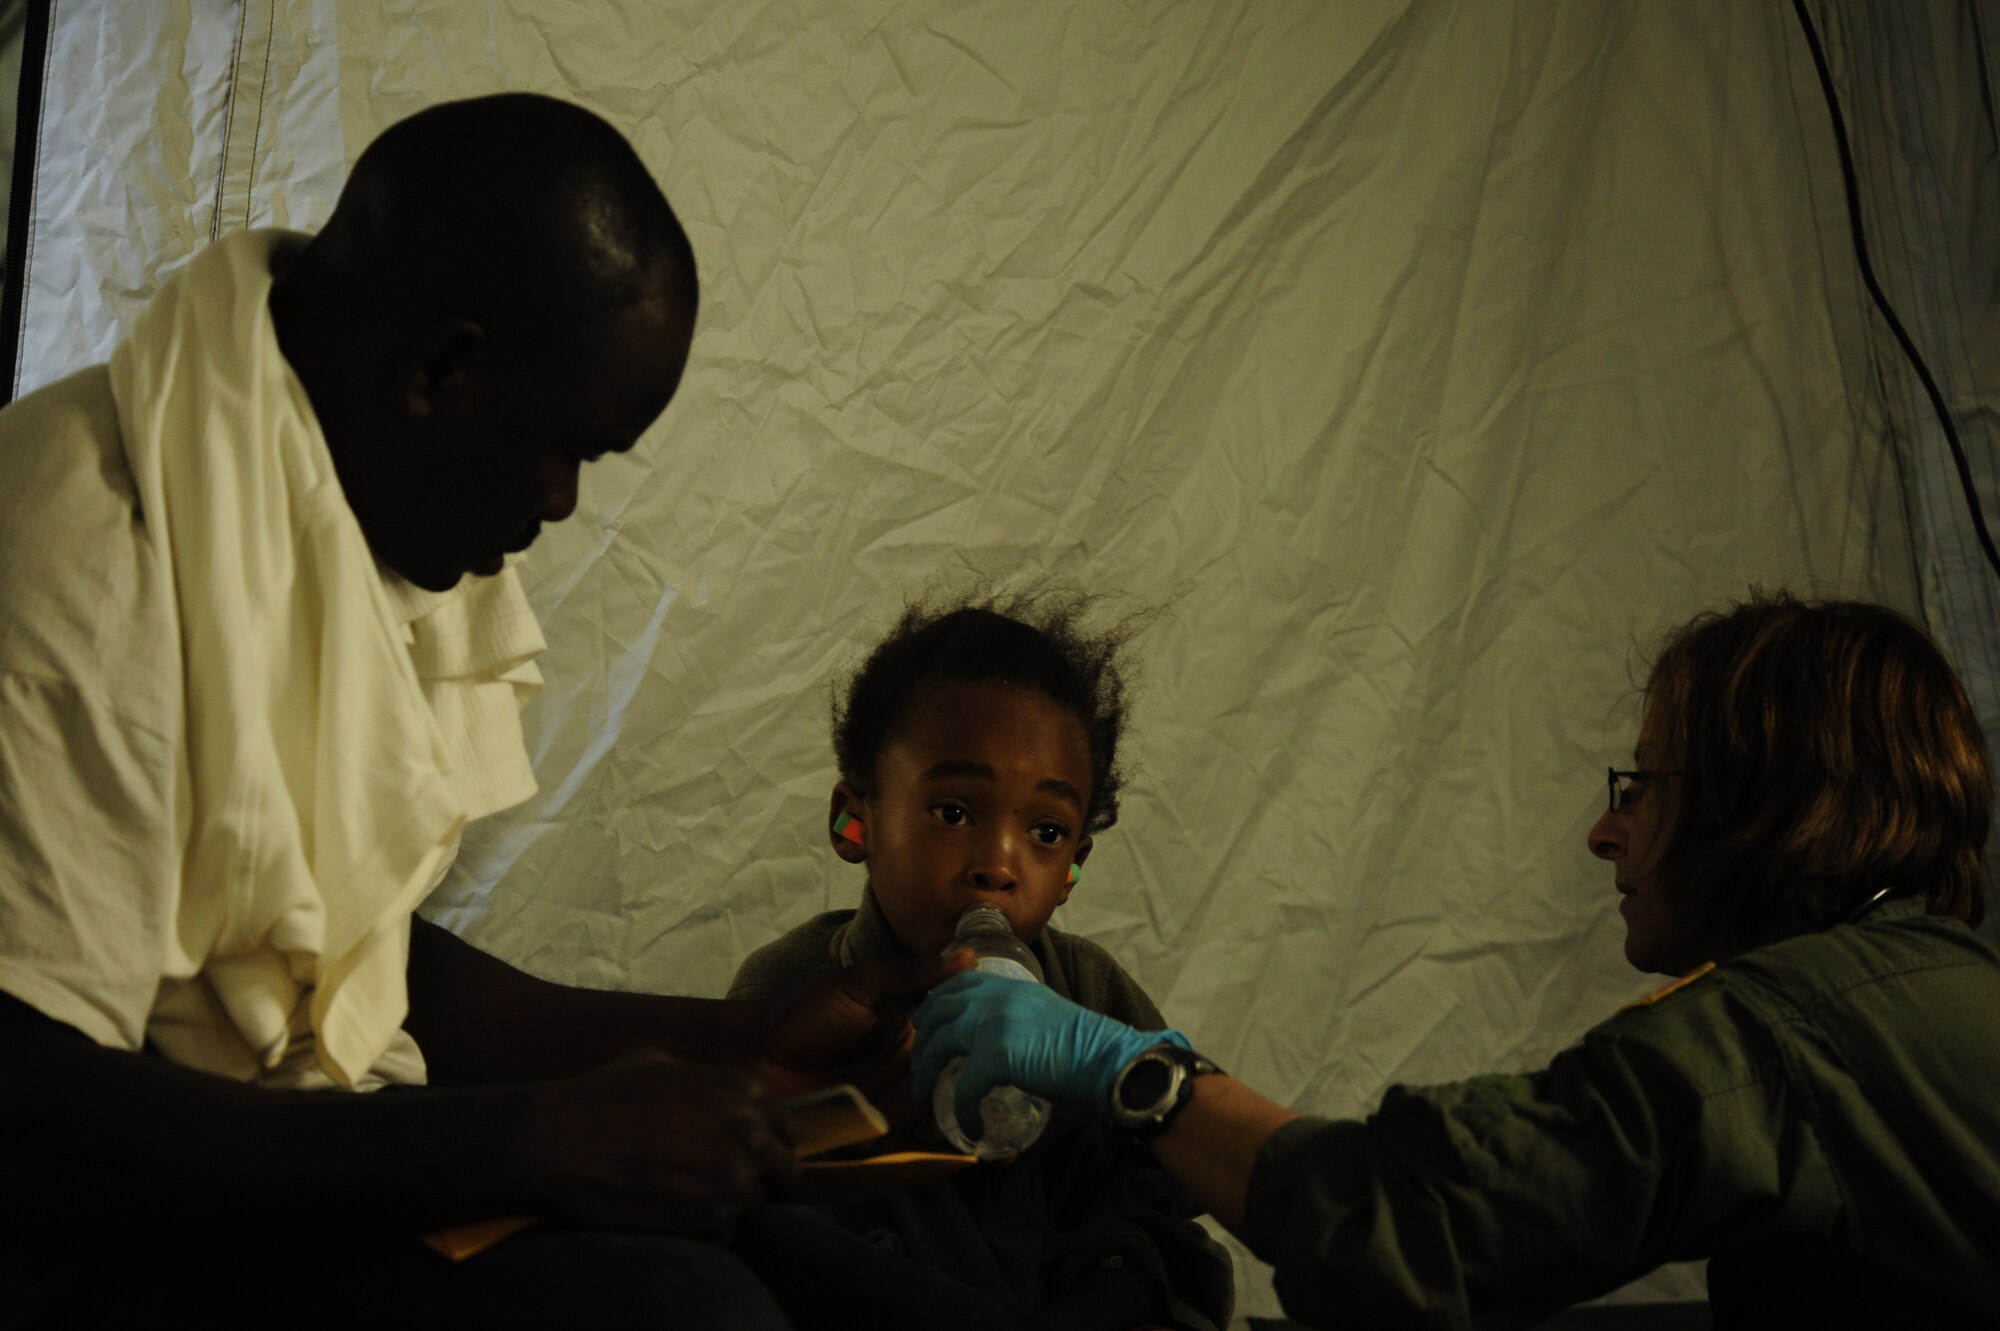 A six-year-old Haitian boy is given water by a medical technician with 1st Special Operations Support Squadron at the Toussaint Louverture International Airport in Port-au-Prince, Haiti, Jan. 19, 2010. The boy will be airlifted to a hospital in southern Florida. (U.S. Air Force photo by Tech. Sgt. James L. Harper Jr./Released)